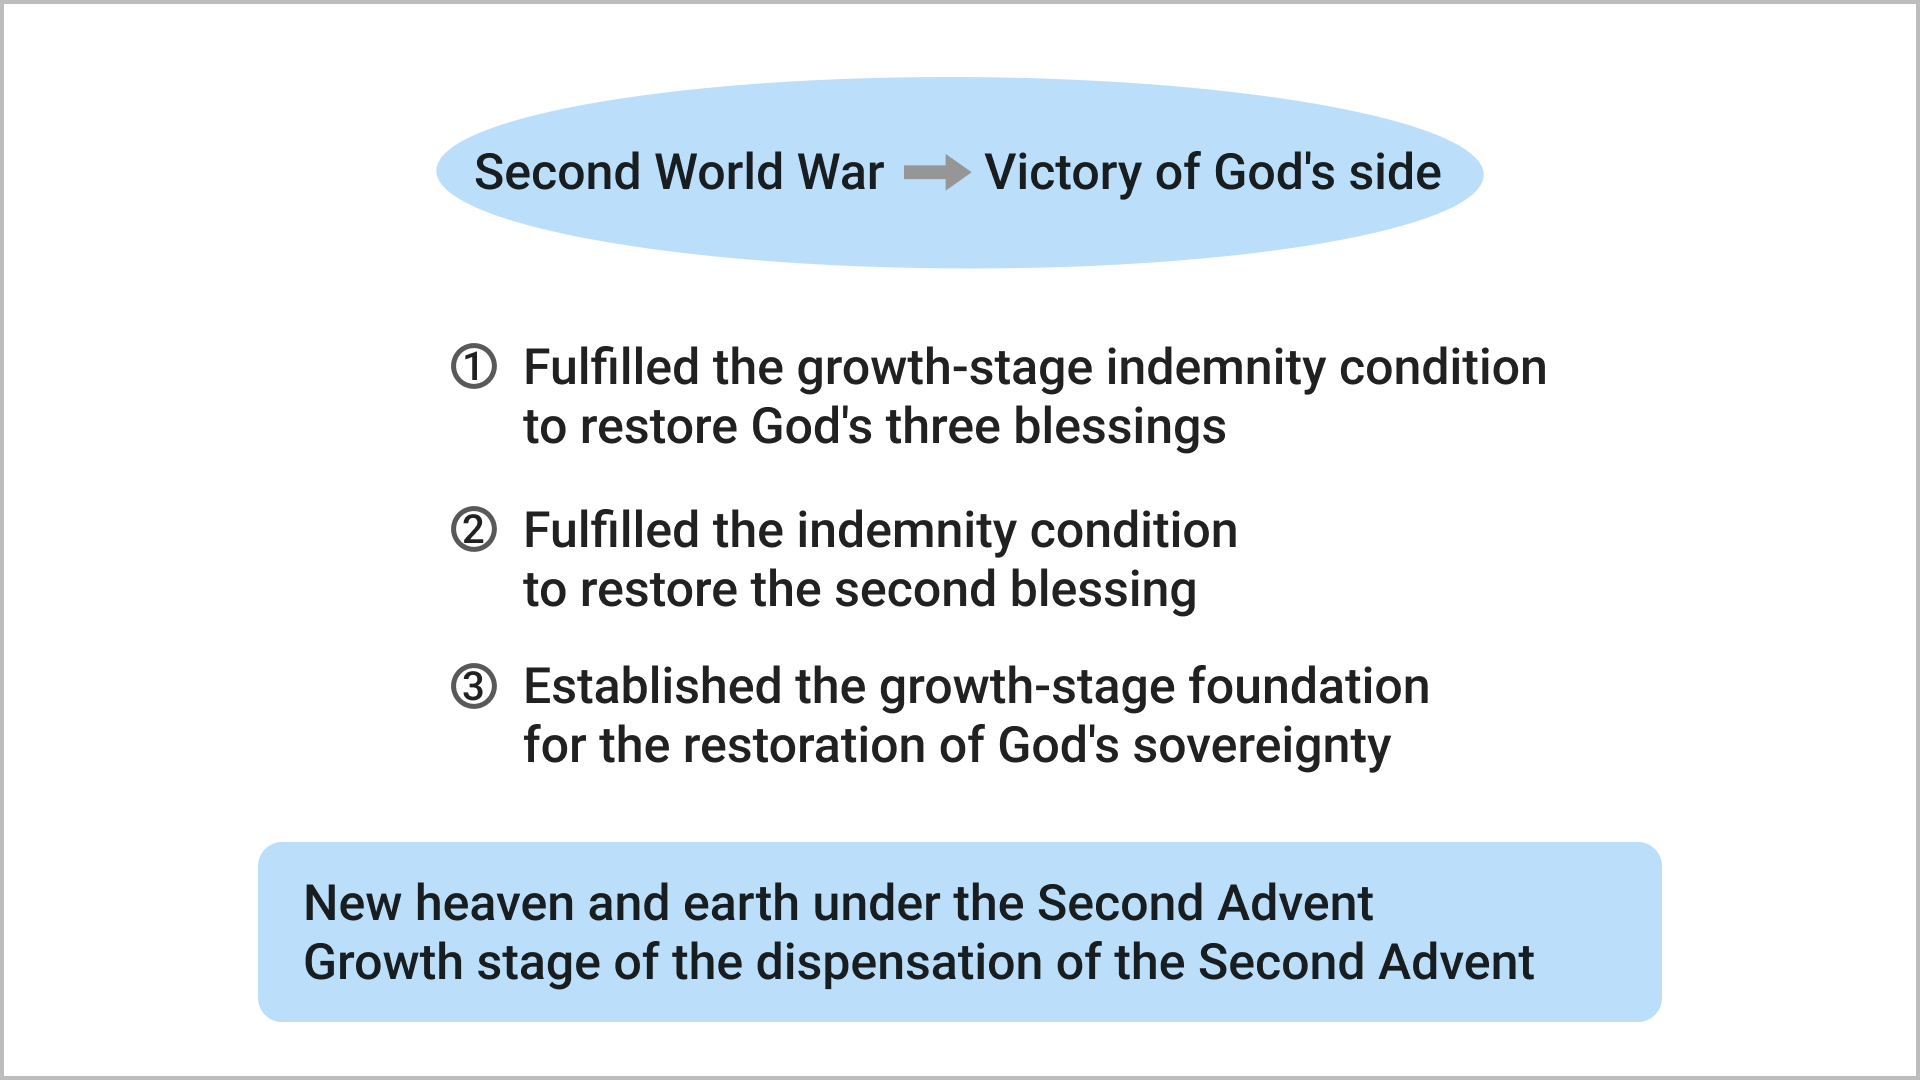 The Providential Results of the Second World War